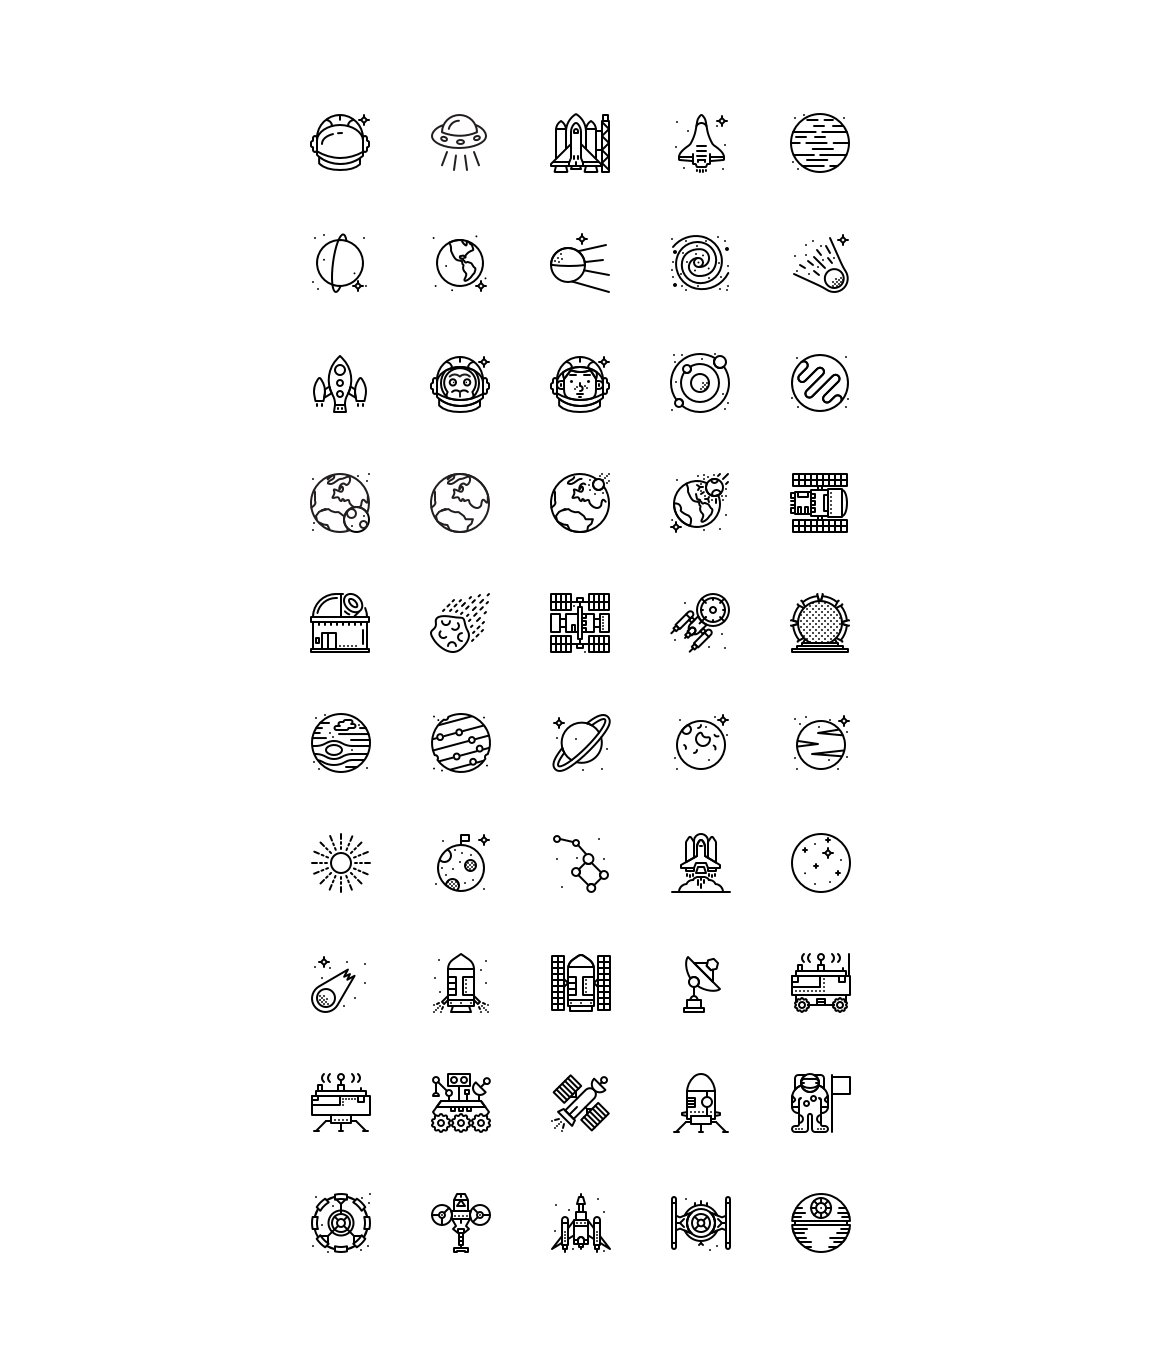 SMASHICONS - 200+ Space Icons - preview image.